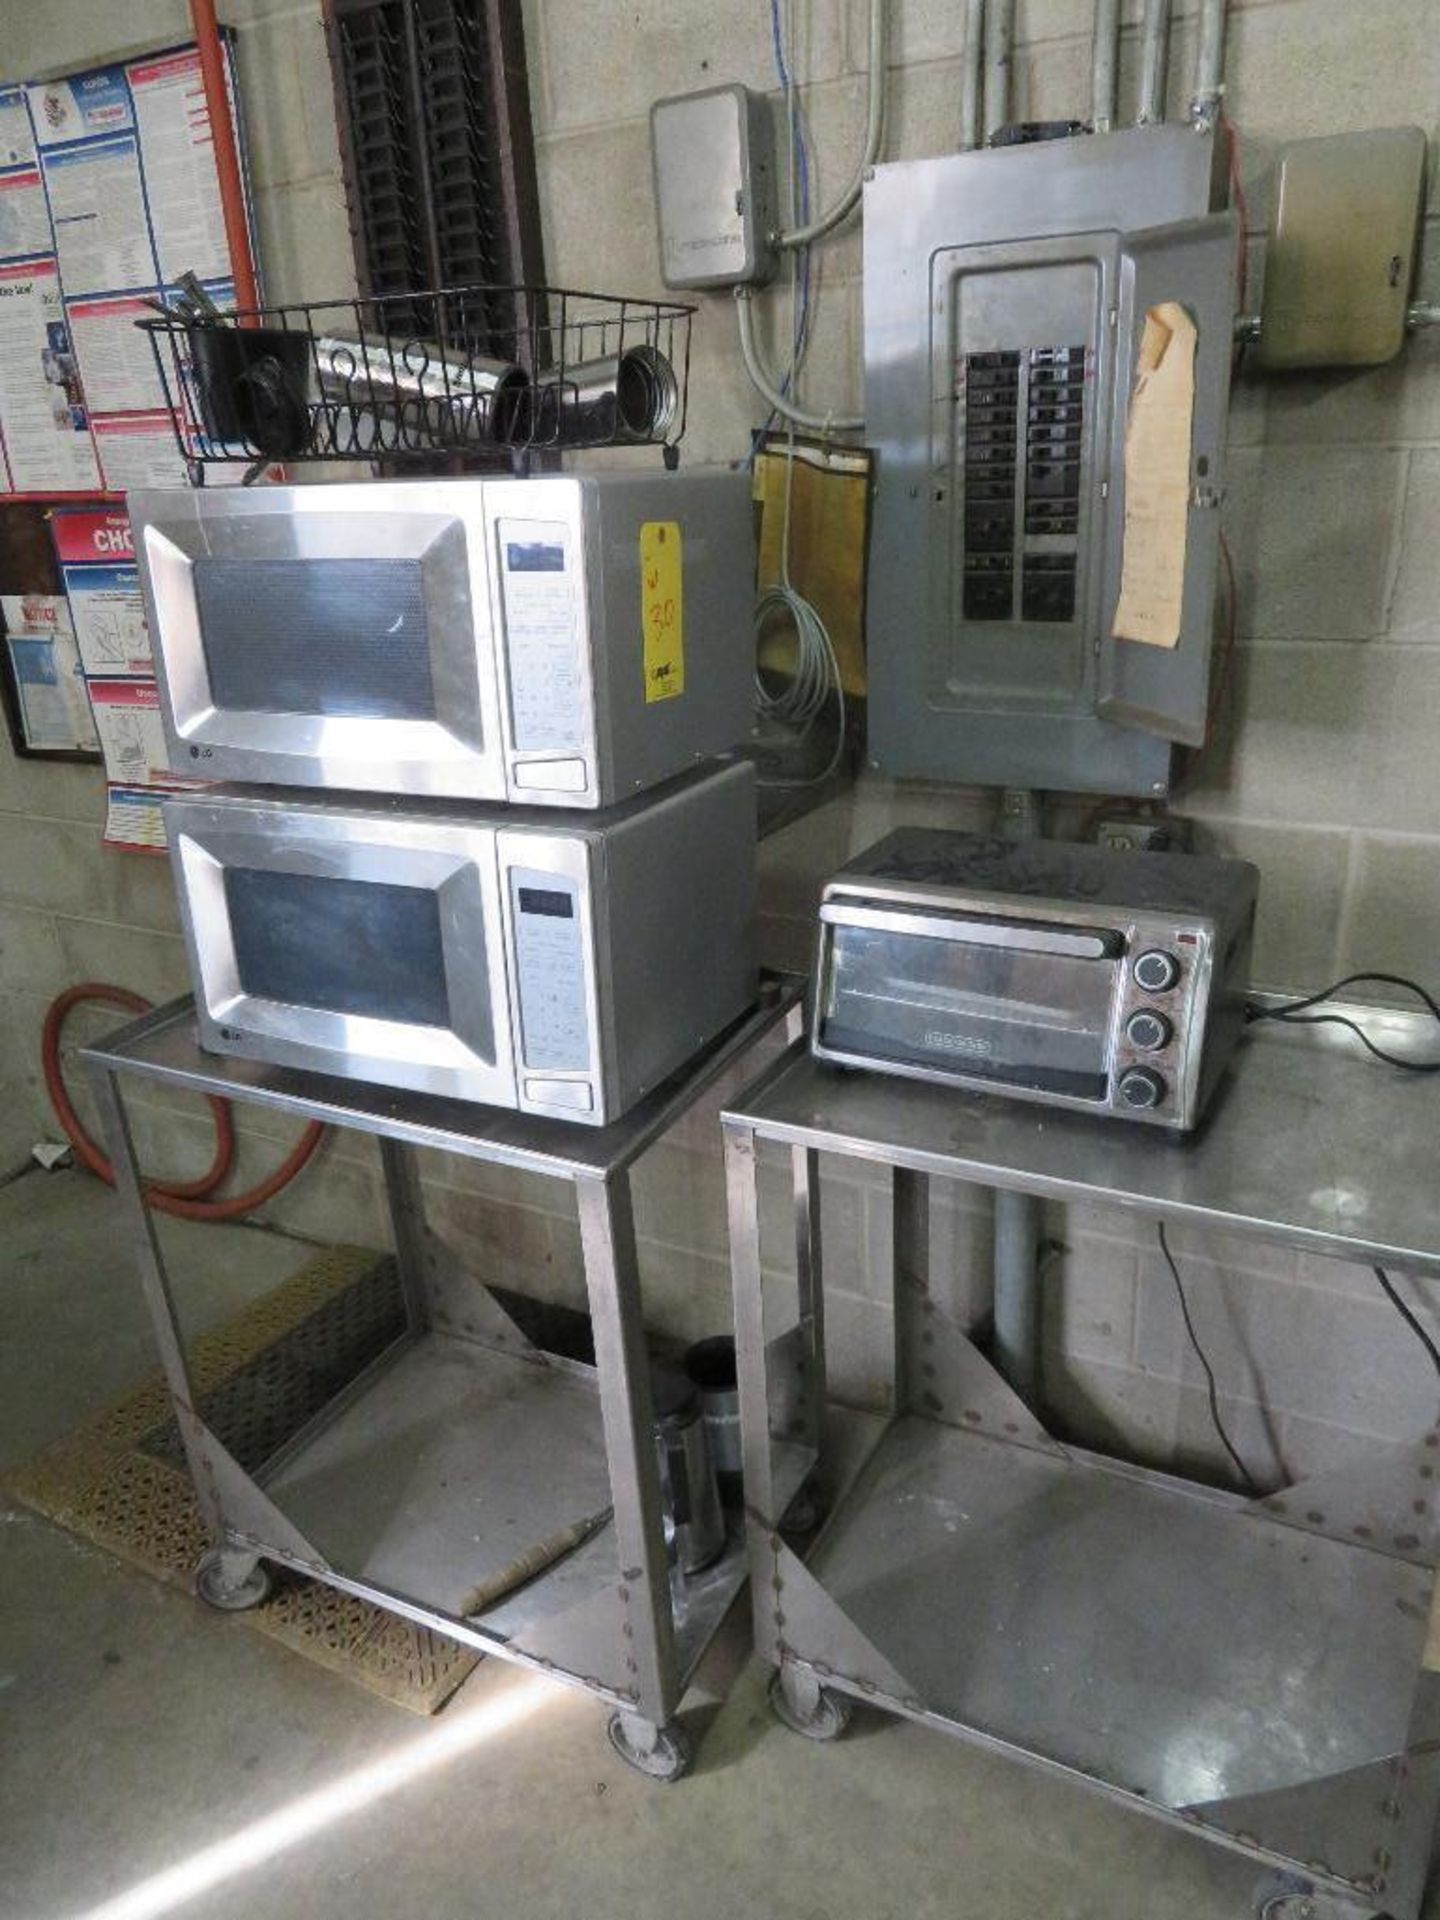 LOT: Refrigerator, (2) Microwave Ovens, Toaster Oven on (2) Stainless Steel Rolling Carts - Image 2 of 2